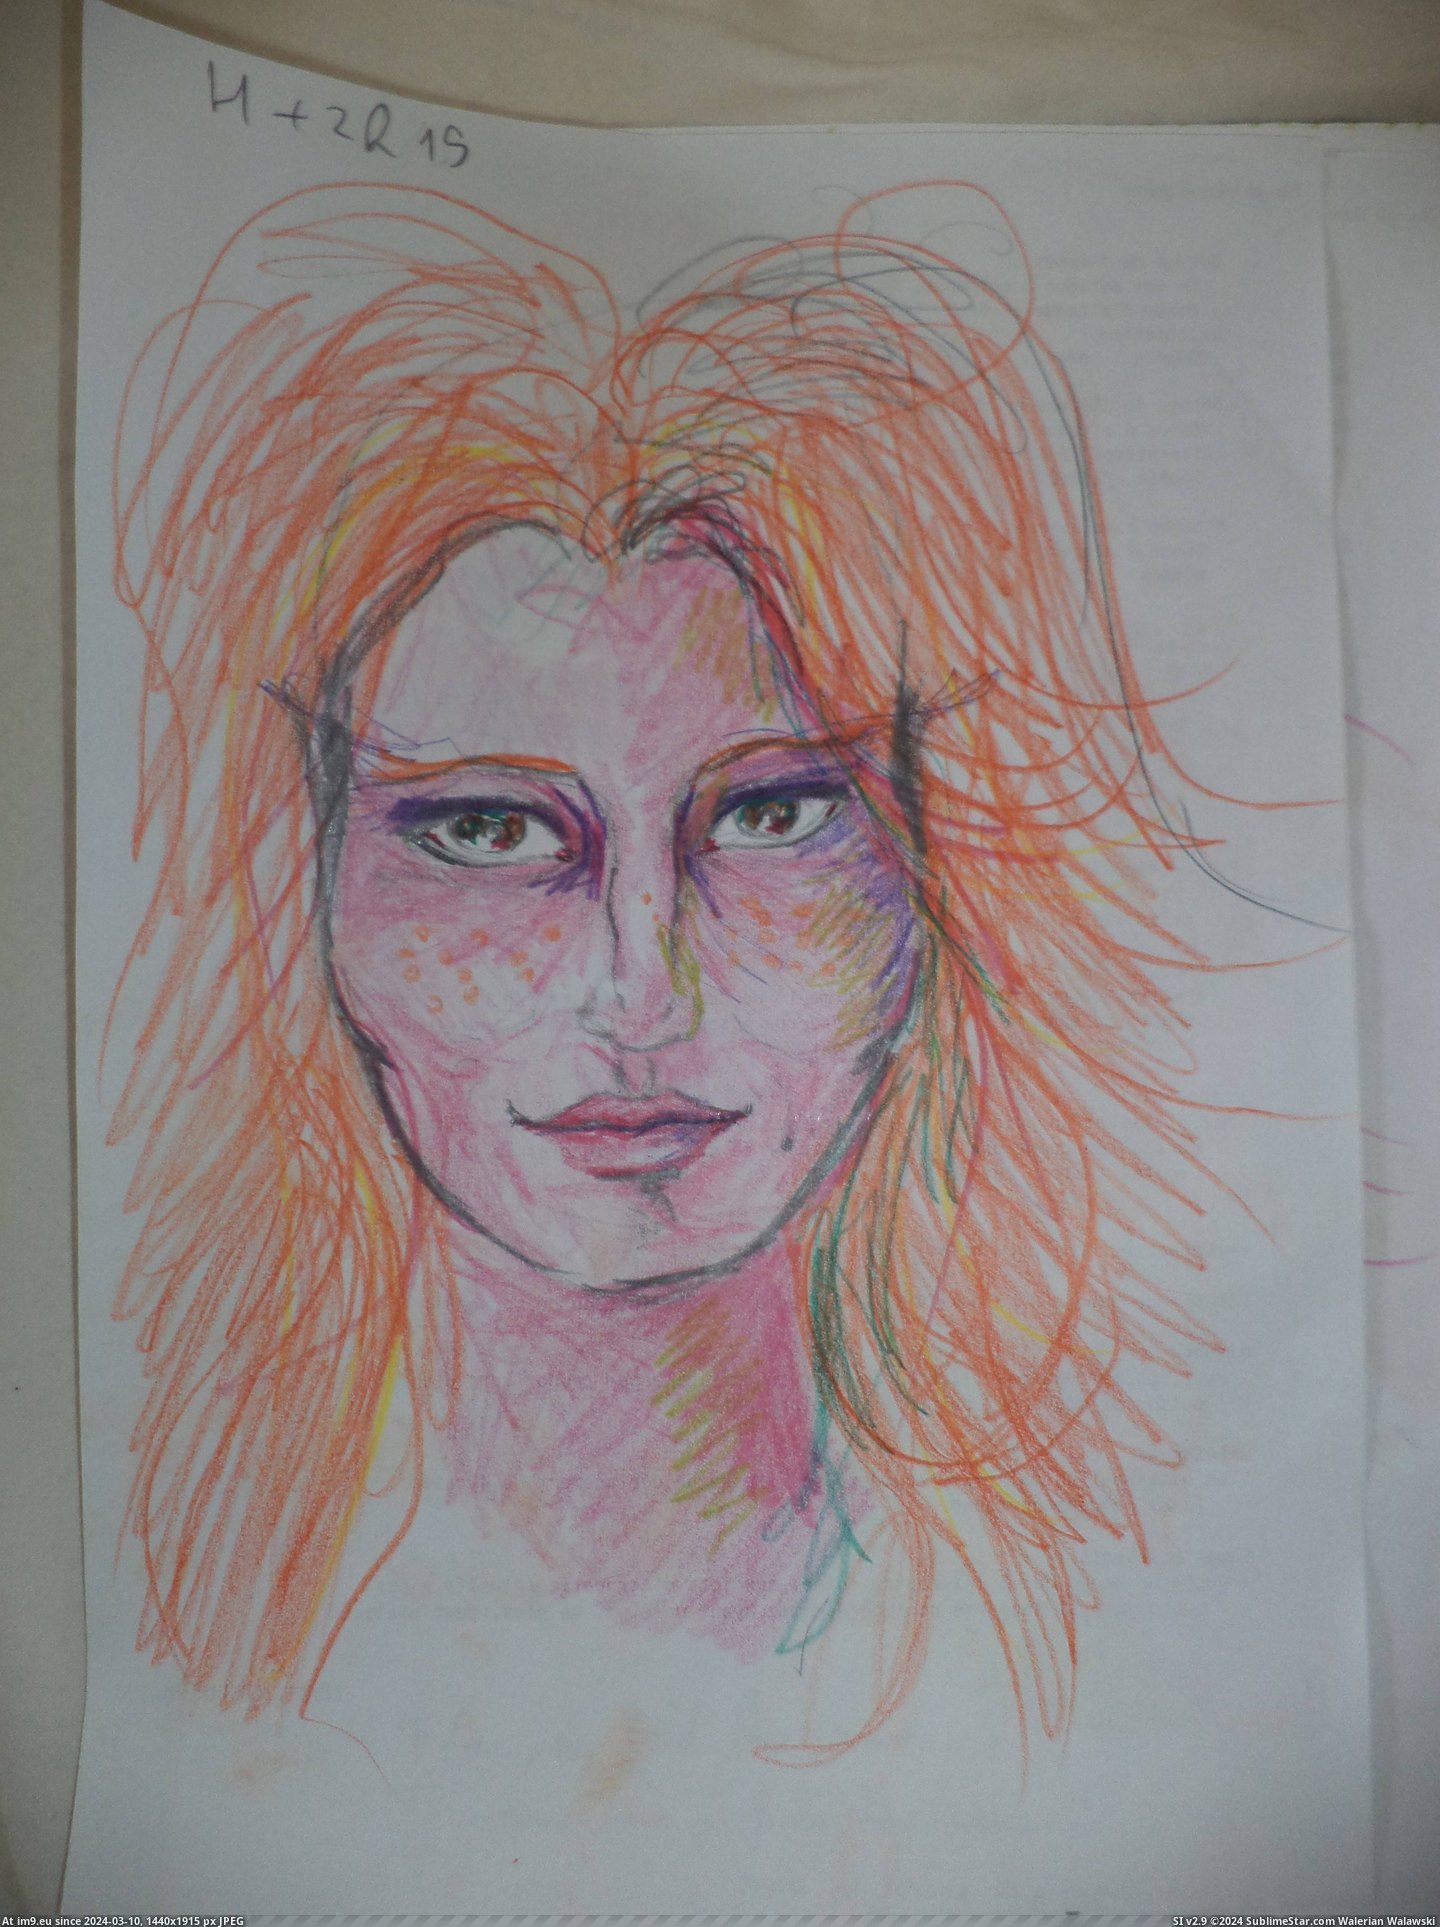 #Time #Friend #Portraits #Lsd #Trip #Drew [Pics] What a LSD trip looks like: a friend of mine drew 11 self-portraits during her first time. 3 Pic. (Изображение из альбом My r/PICS favs))